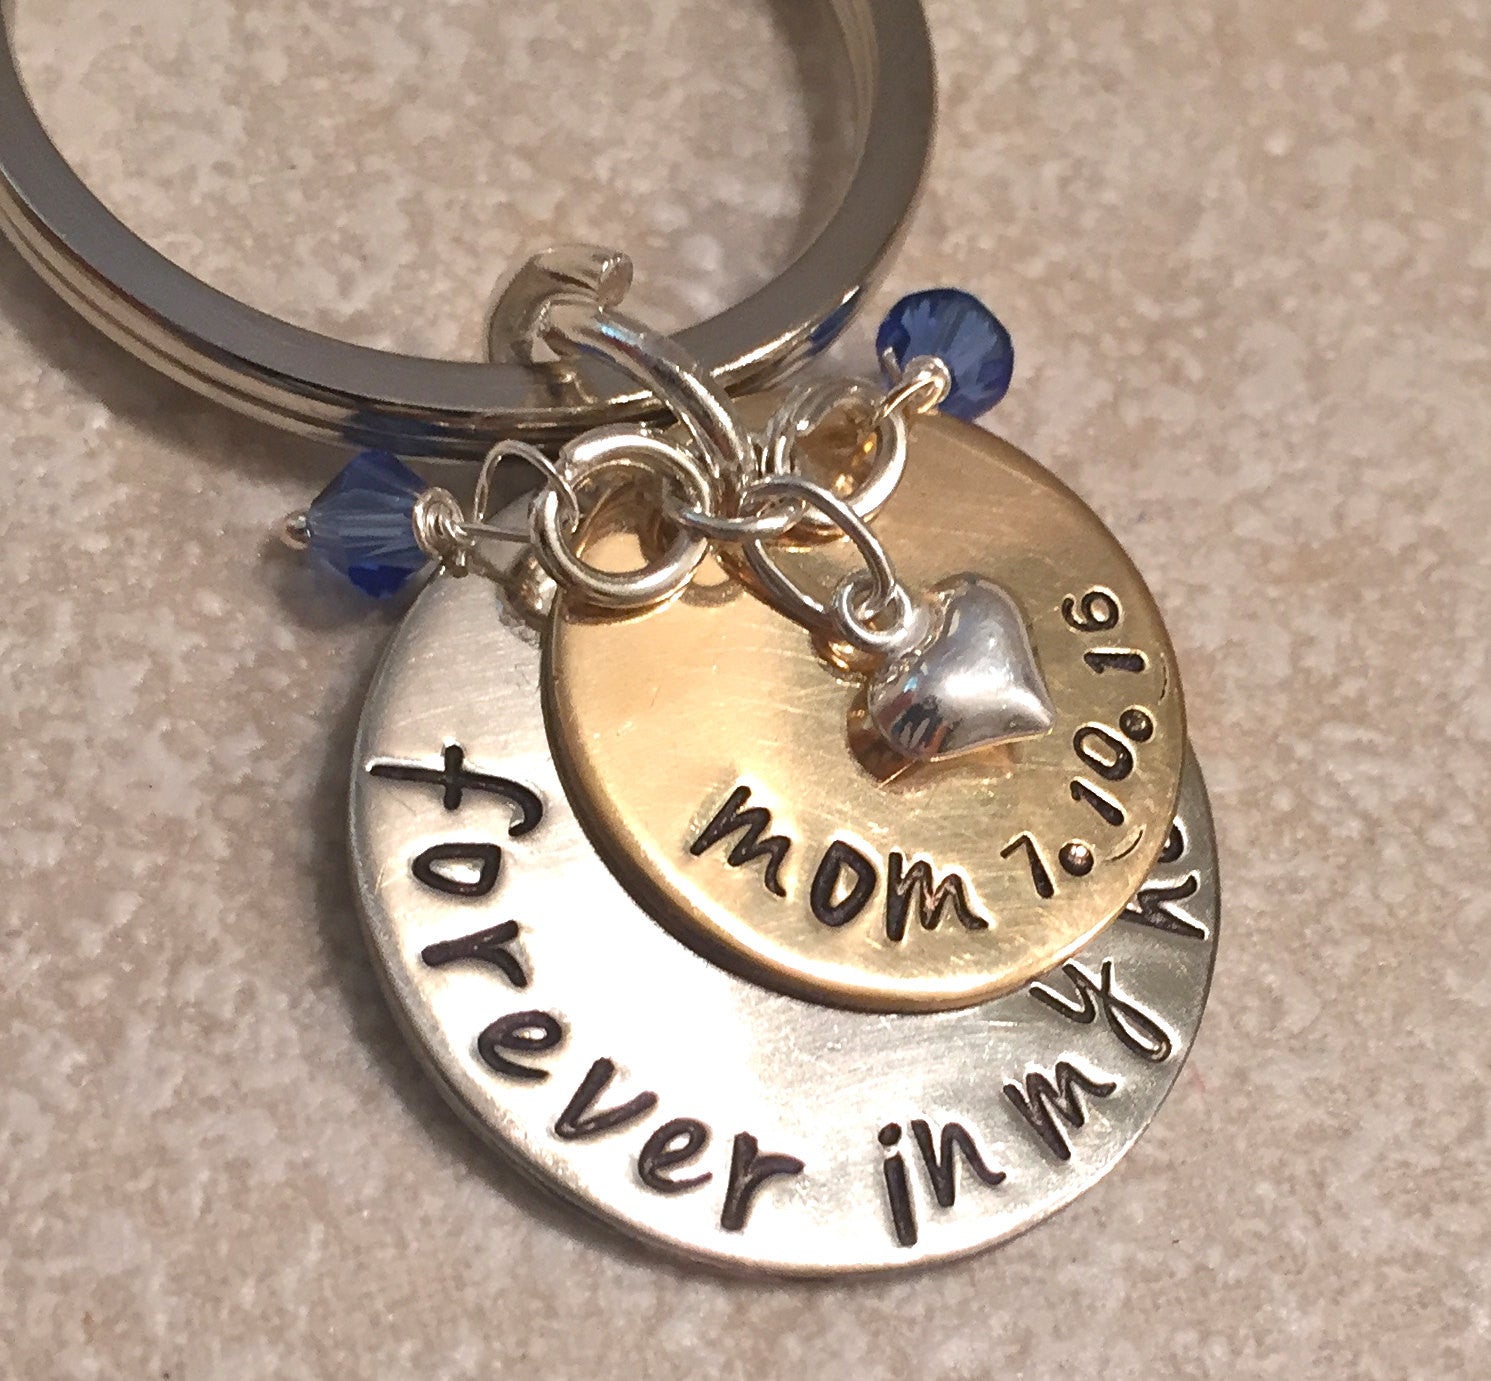 Memorial Keychain, Forever In My Heart, Loss Of Loved One, Loss of Mom, Loss of Dad, Memorial Gift, natashaaloha - Natashaaloha, jewelry, bracelets, necklace, keychains, fishing lures, gifts for men, charms, personalized, 